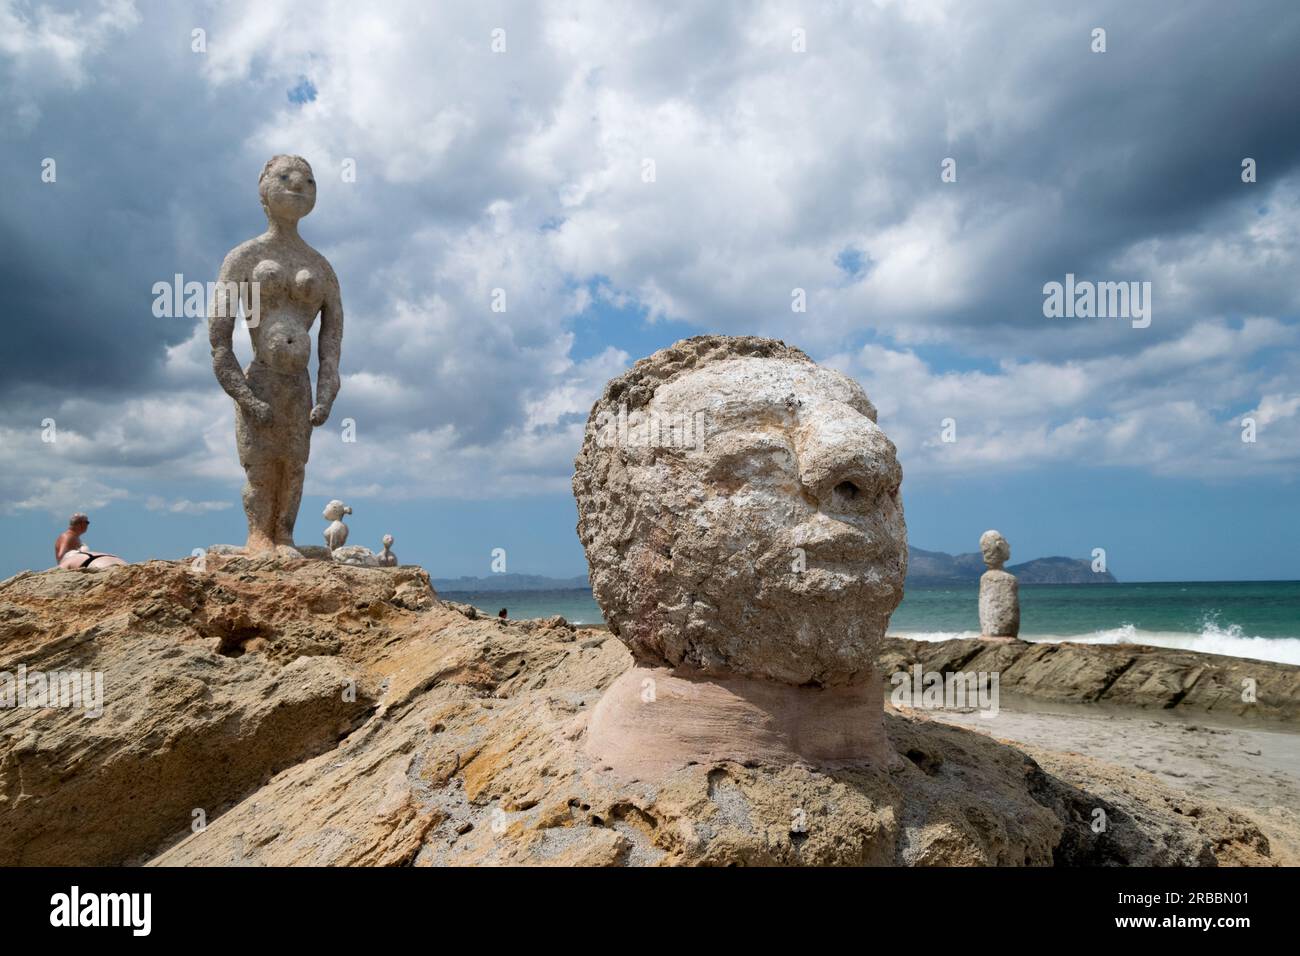 Big stone head sculpture from Son Bauló beach at Palma de Mallorca Spanish island. Mystical stone sculptures with Human forms. Stock Photo